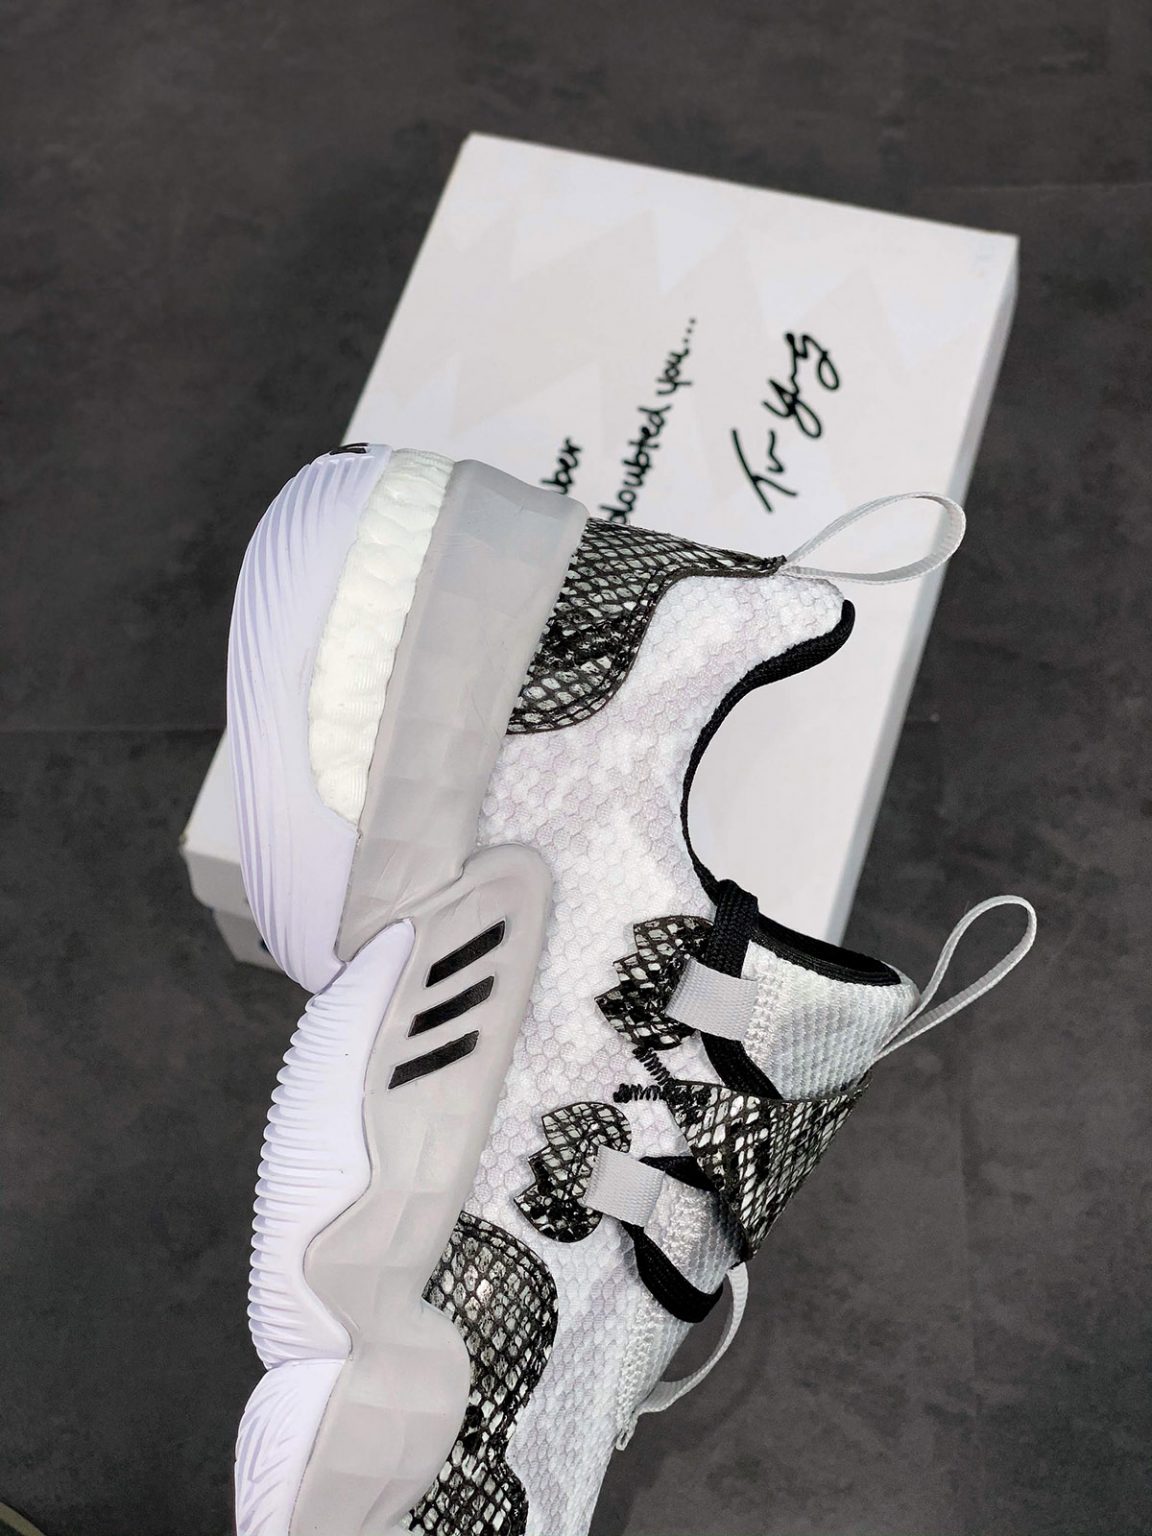 adidas Trae Young 1 “Snakeskin” Light Solid Grey-White-Black For Sale ...